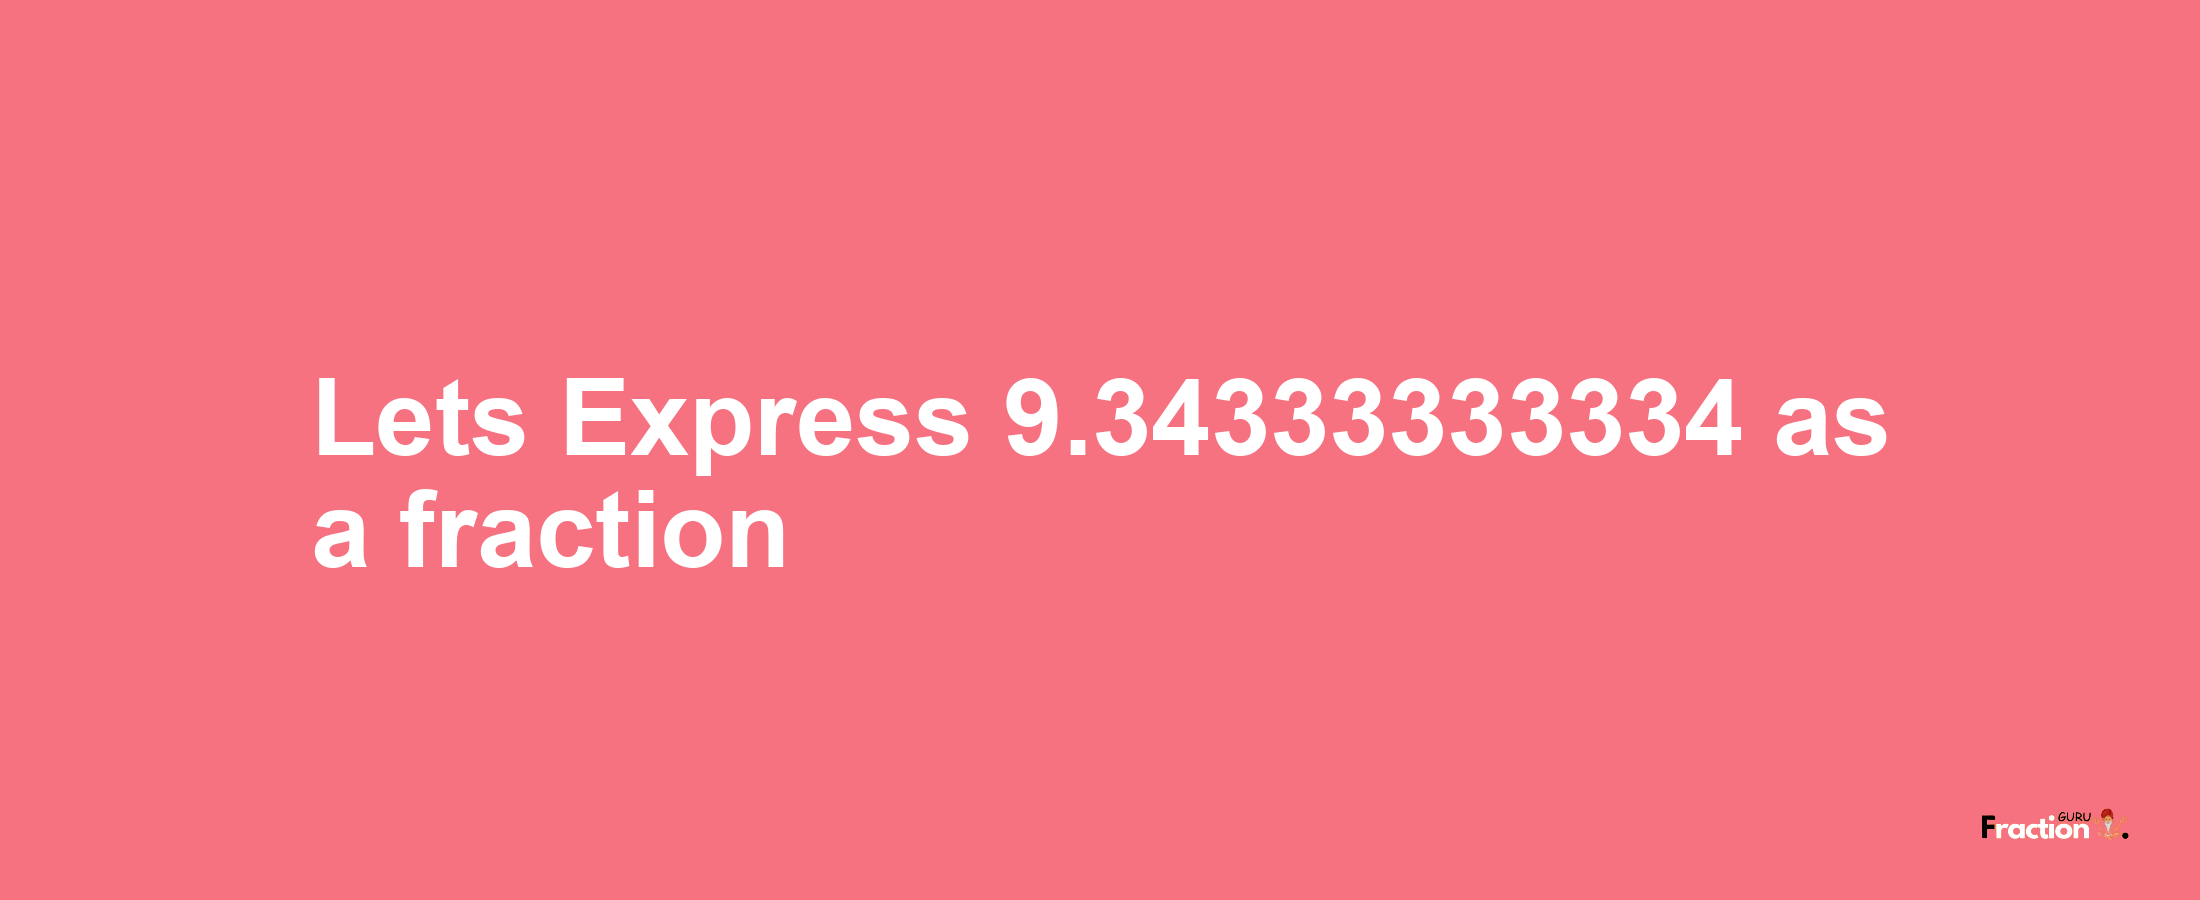 Lets Express 9.34333333334 as afraction